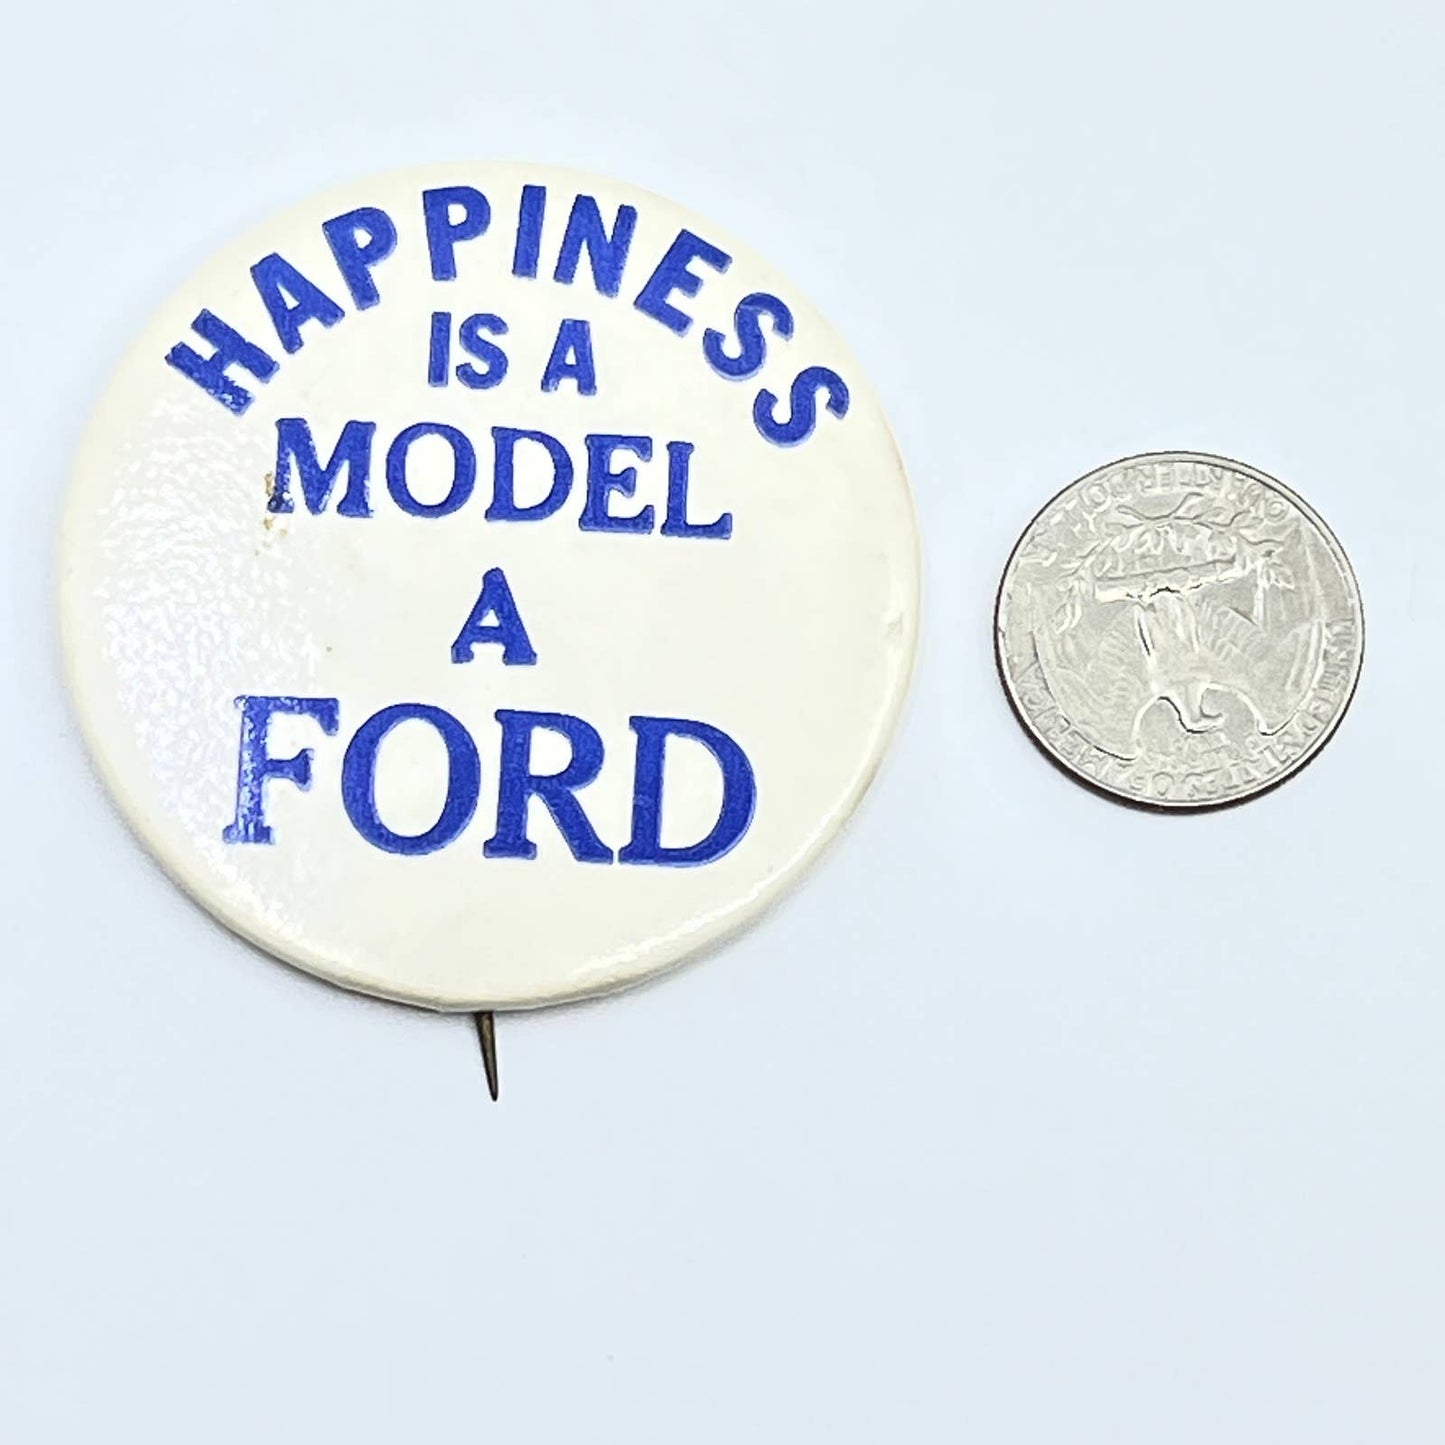 Vintage Happiness is a Model A Ford Pinback Button SD9